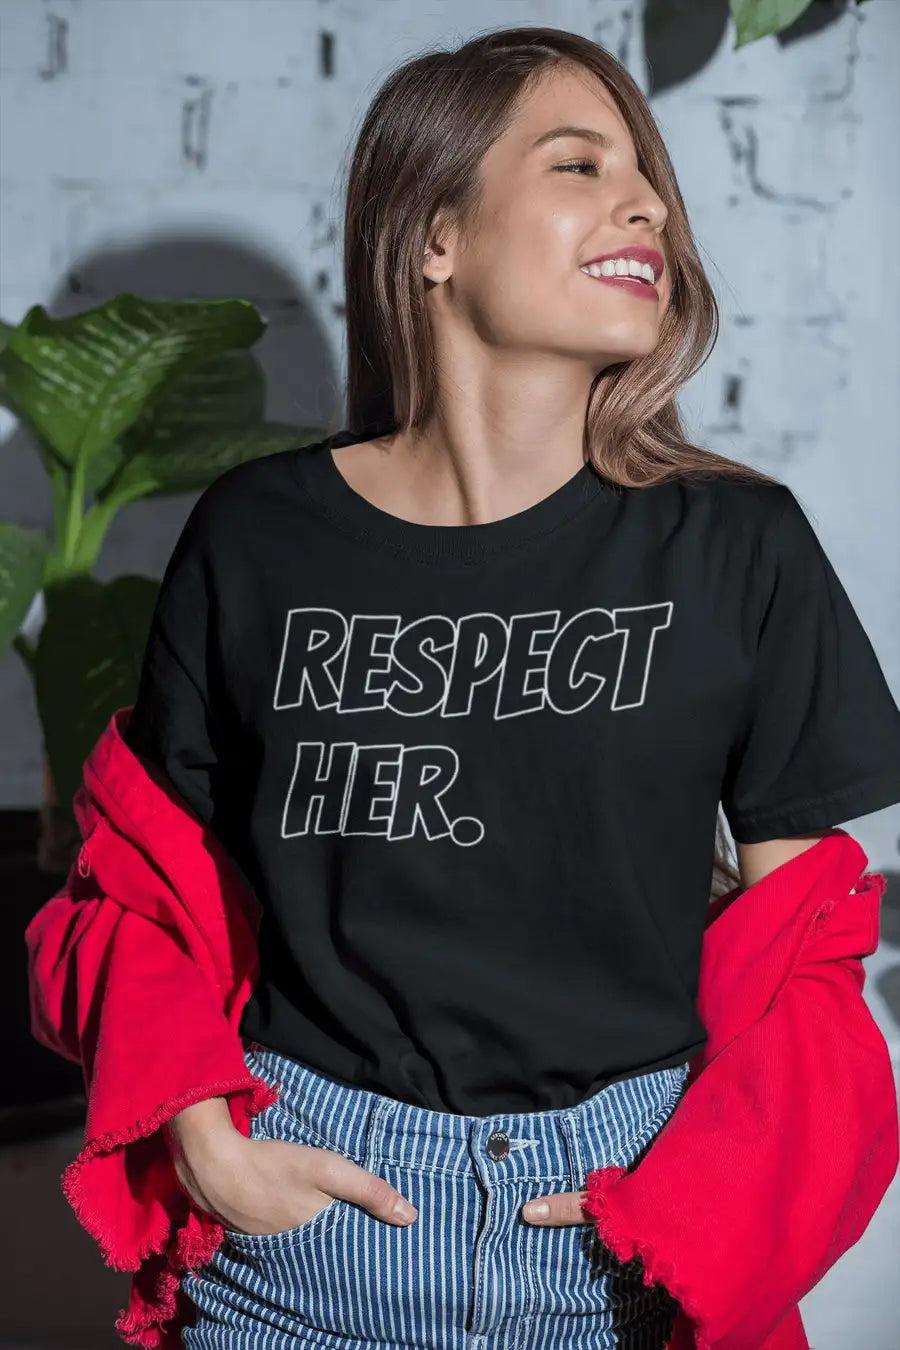 Respect Her Strong Female T Shirt for Women | Premium Design | Catch My Drift India - Catch My Drift India  black, clothing, female, general, made in india, mom, shirt, t shirt, trending, tsh